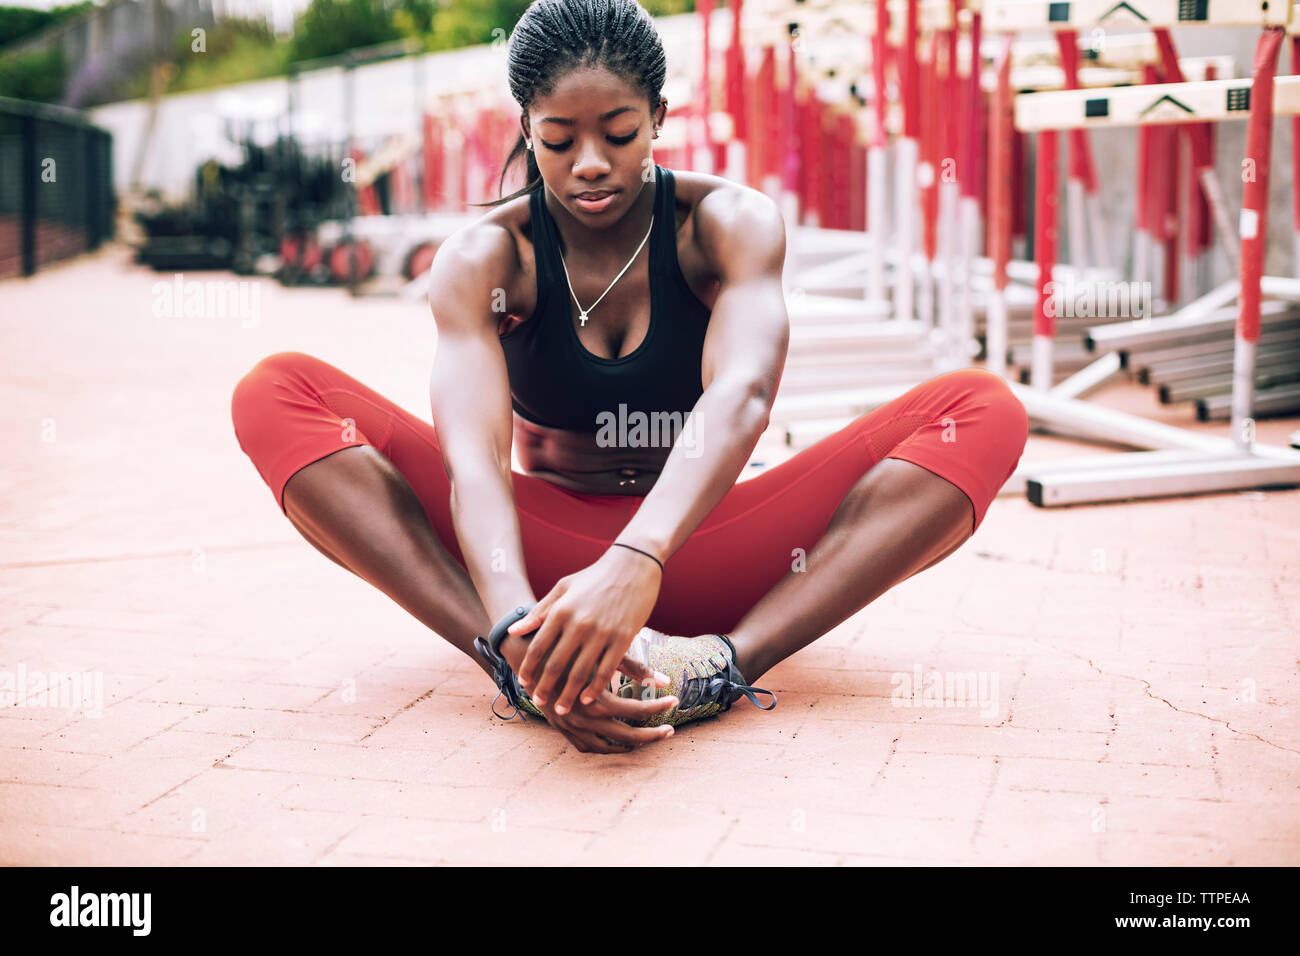 Female athlete performing short adductor stretch on field Stock Photo